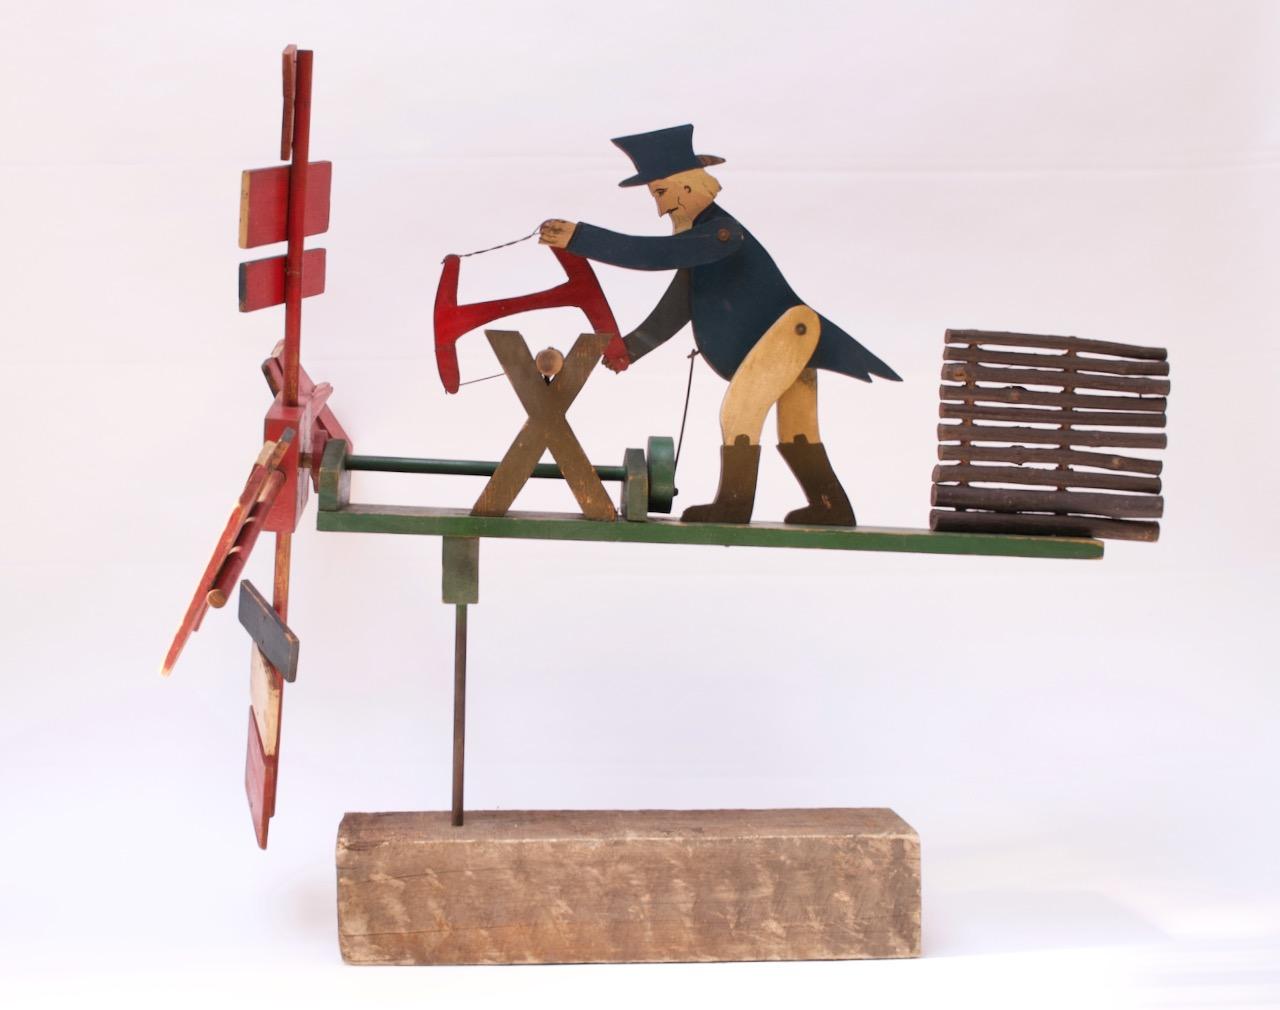 Charming whirligig depicting a figure resembling Uncle Sam sawing a log mounted to a wooden base. Hand carved, painted, and assembled with applied facial details. When manually turned, the propeller activates the woodman's 'sawing' motion.
This